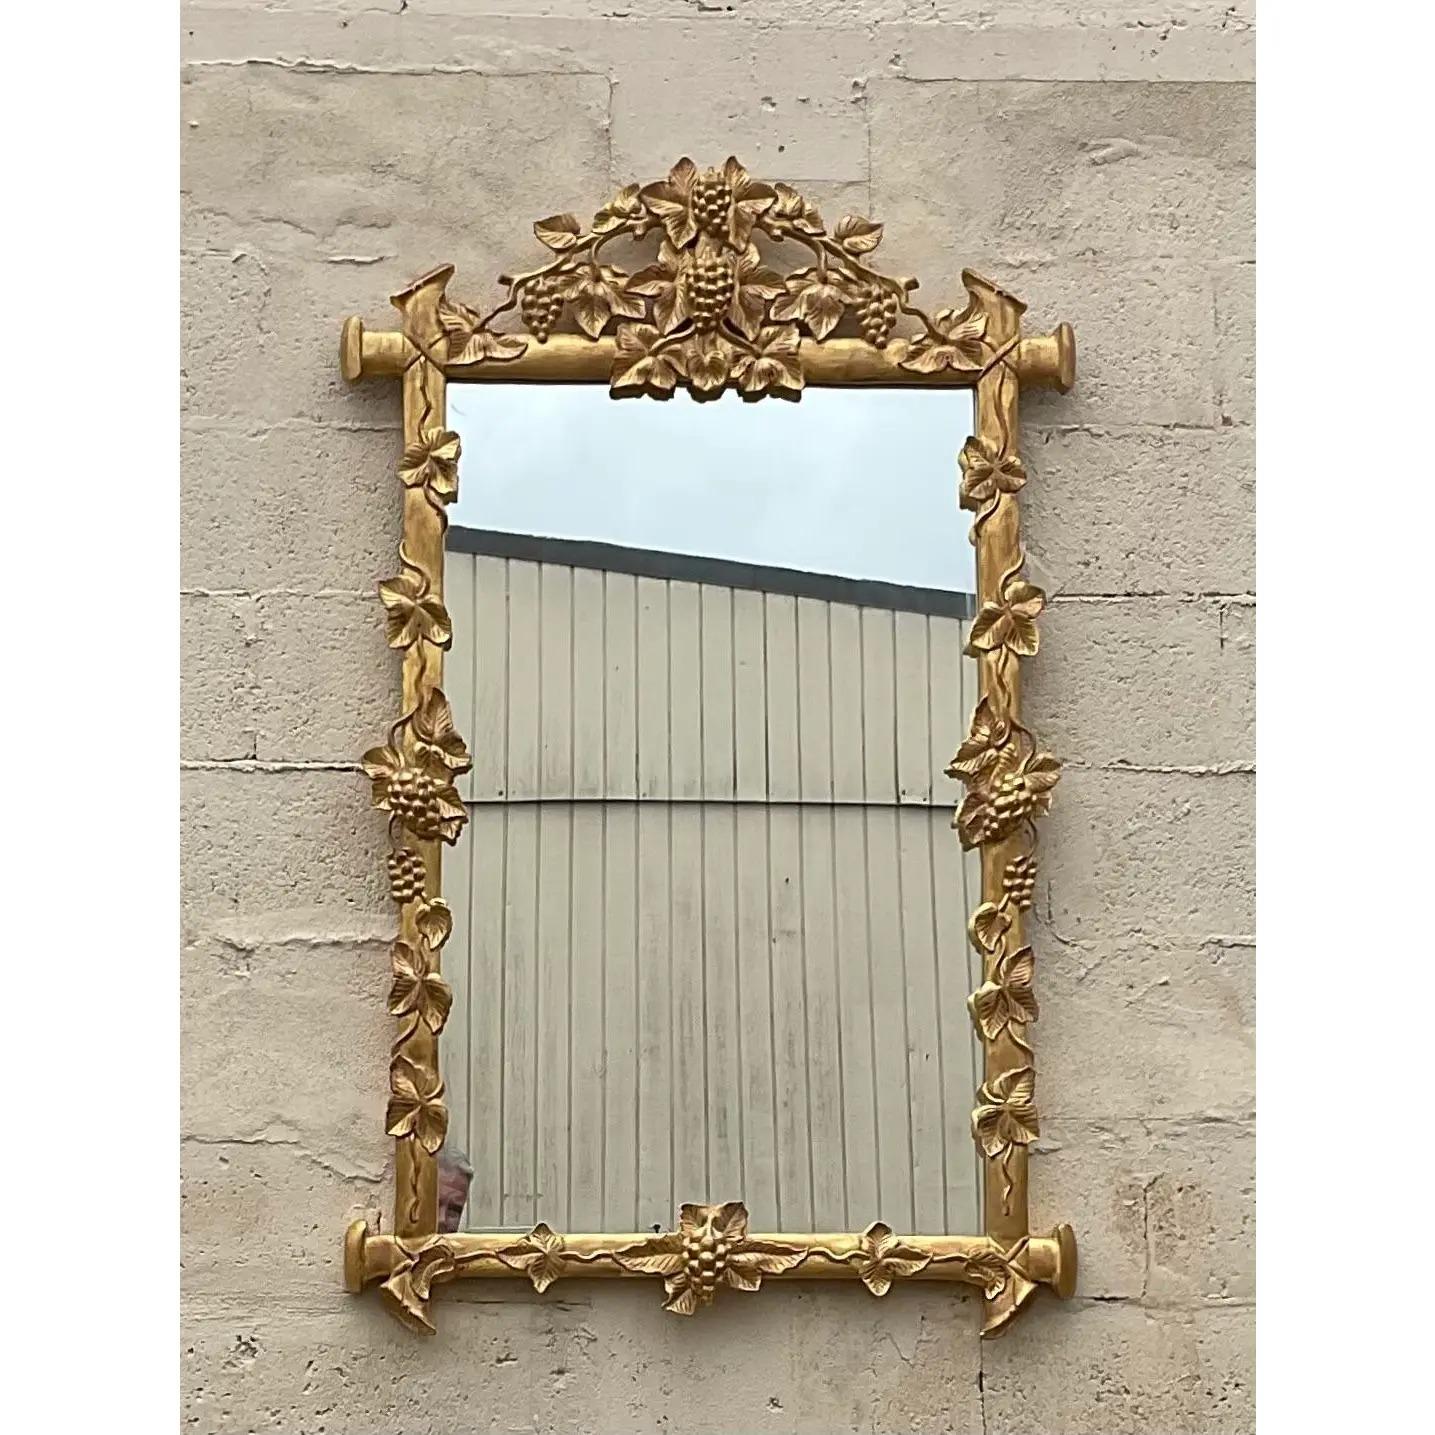 Fantastic vintage gilt mirror. Beautiful hand carved detail. Large and impressive. Acquired from a Palm Beach estate.